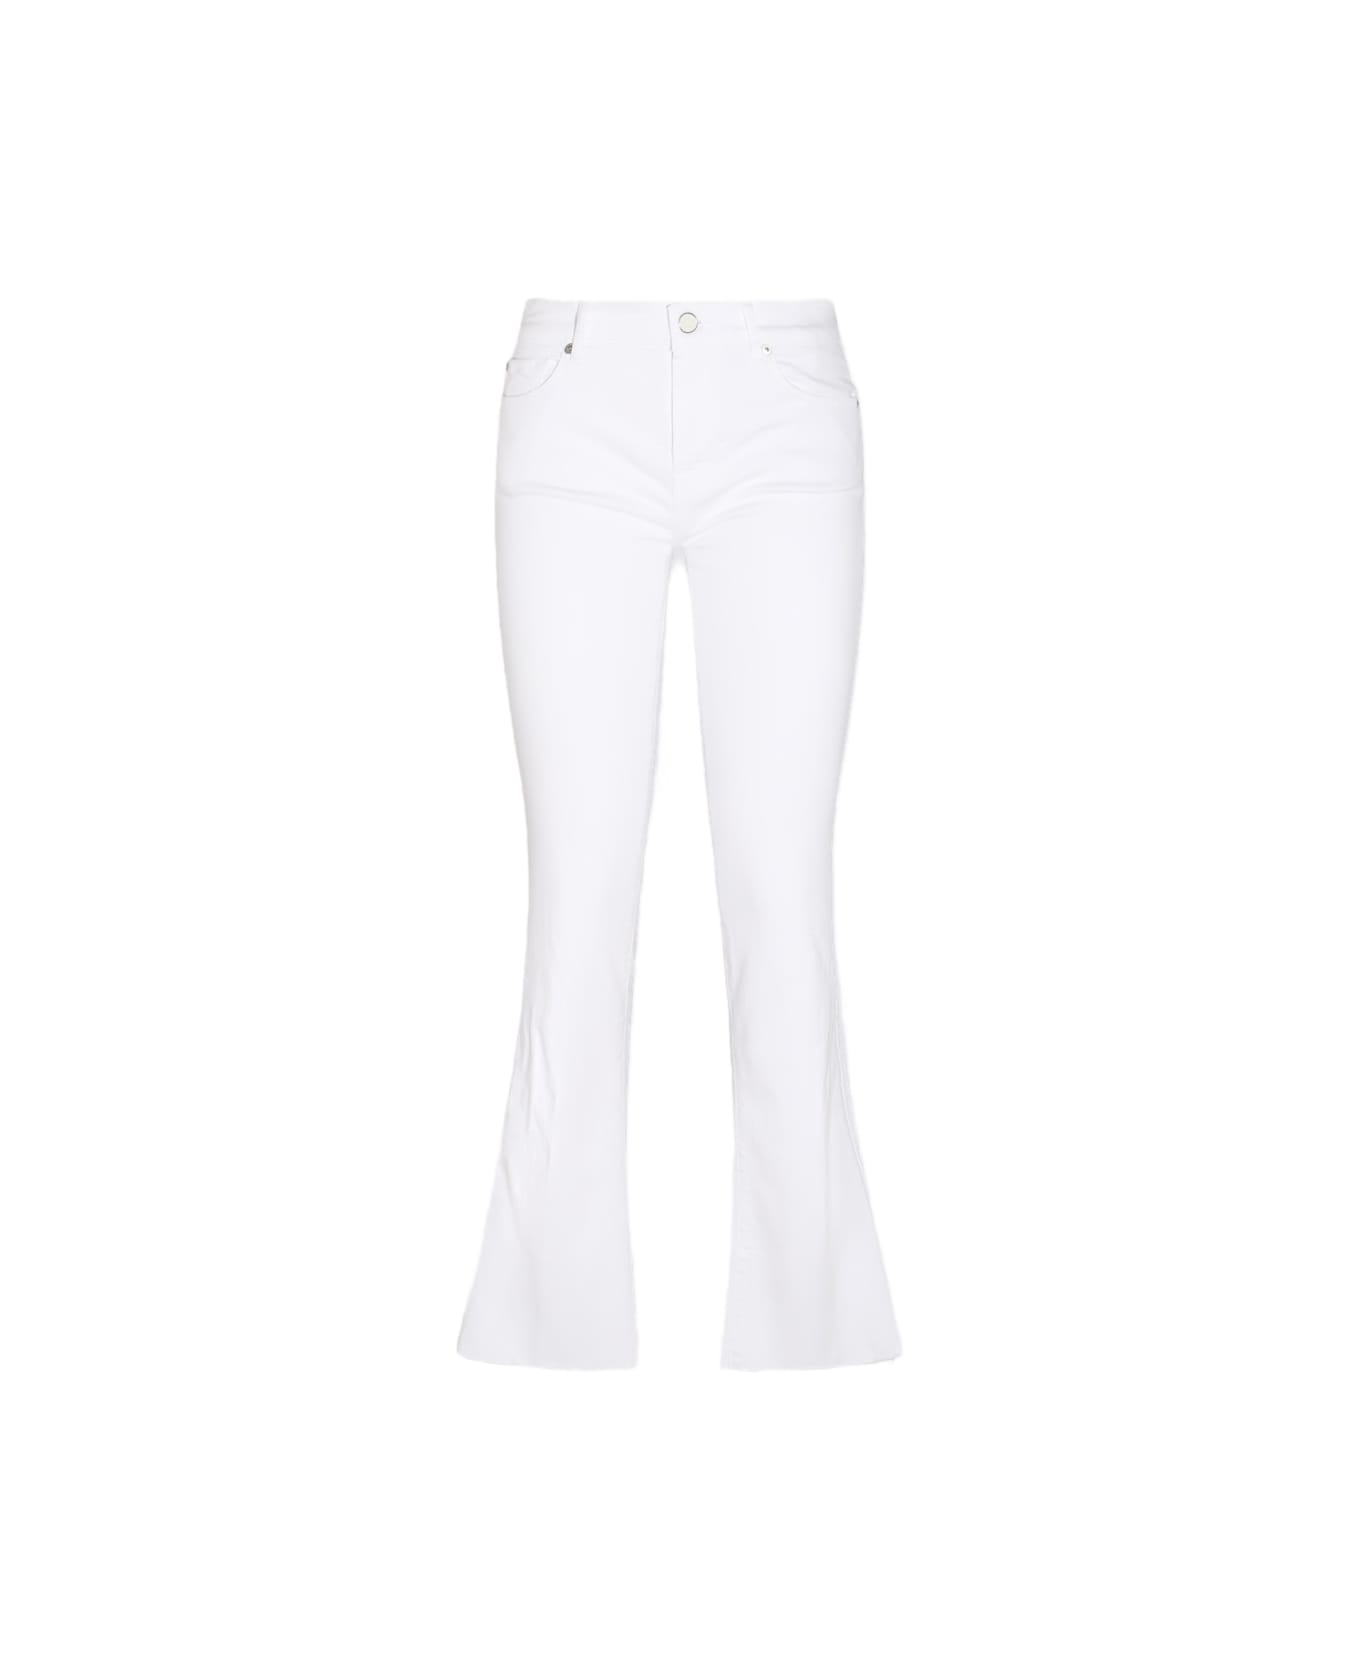 7 For All Mankind White Cotton Blend Jeans - White